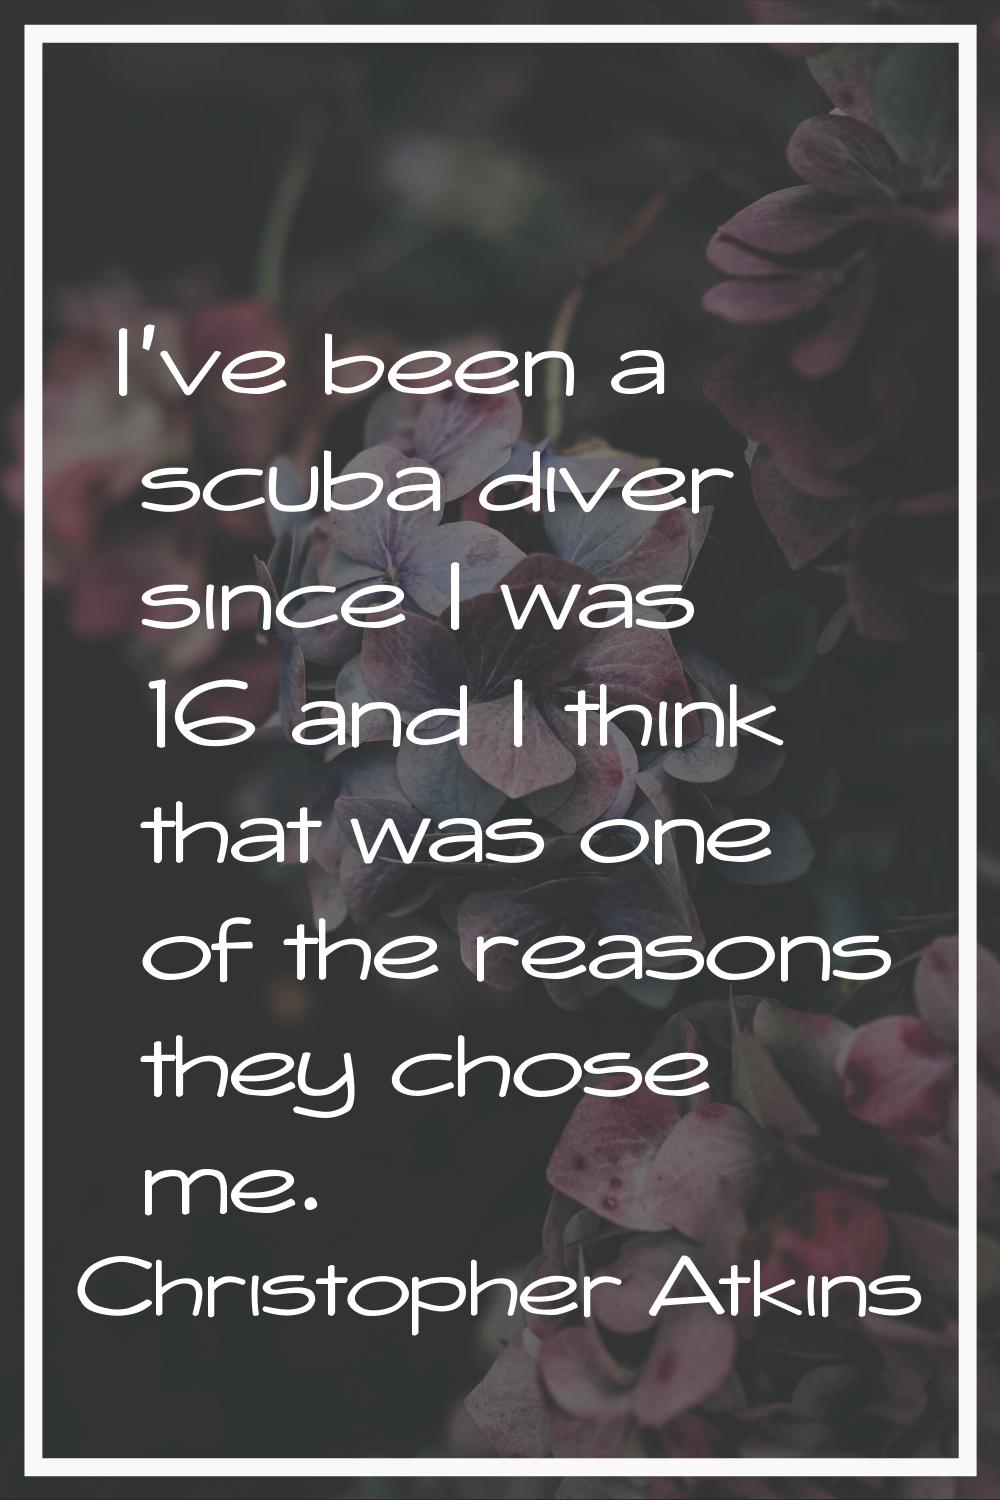 I've been a scuba diver since I was 16 and I think that was one of the reasons they chose me.